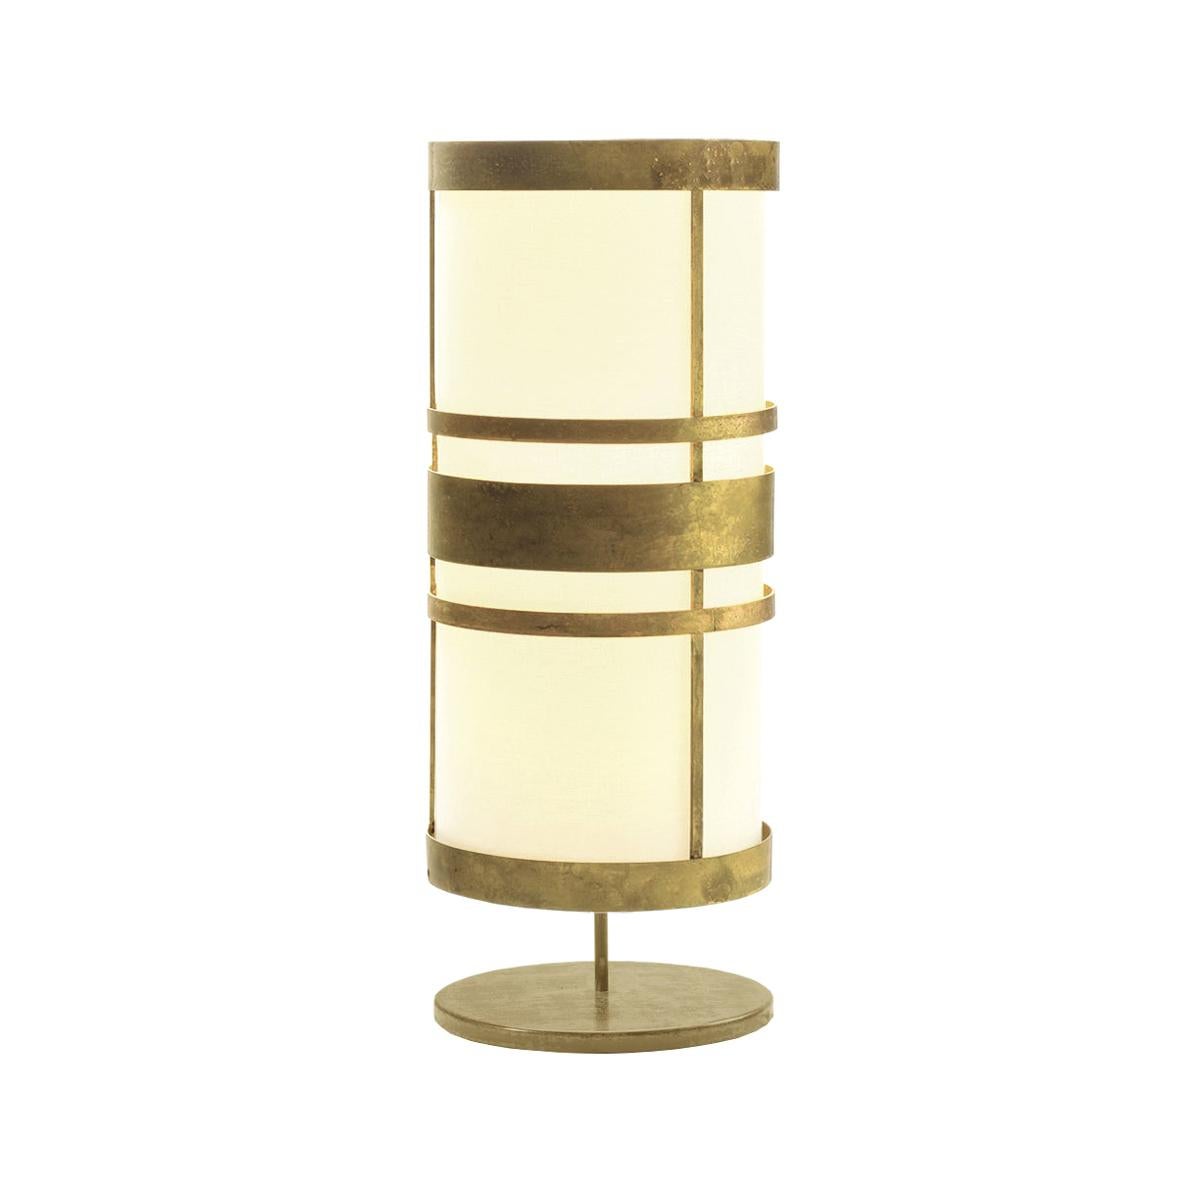 Contemporary Art Deco Inspired Circus Table Lamp Aged Brass